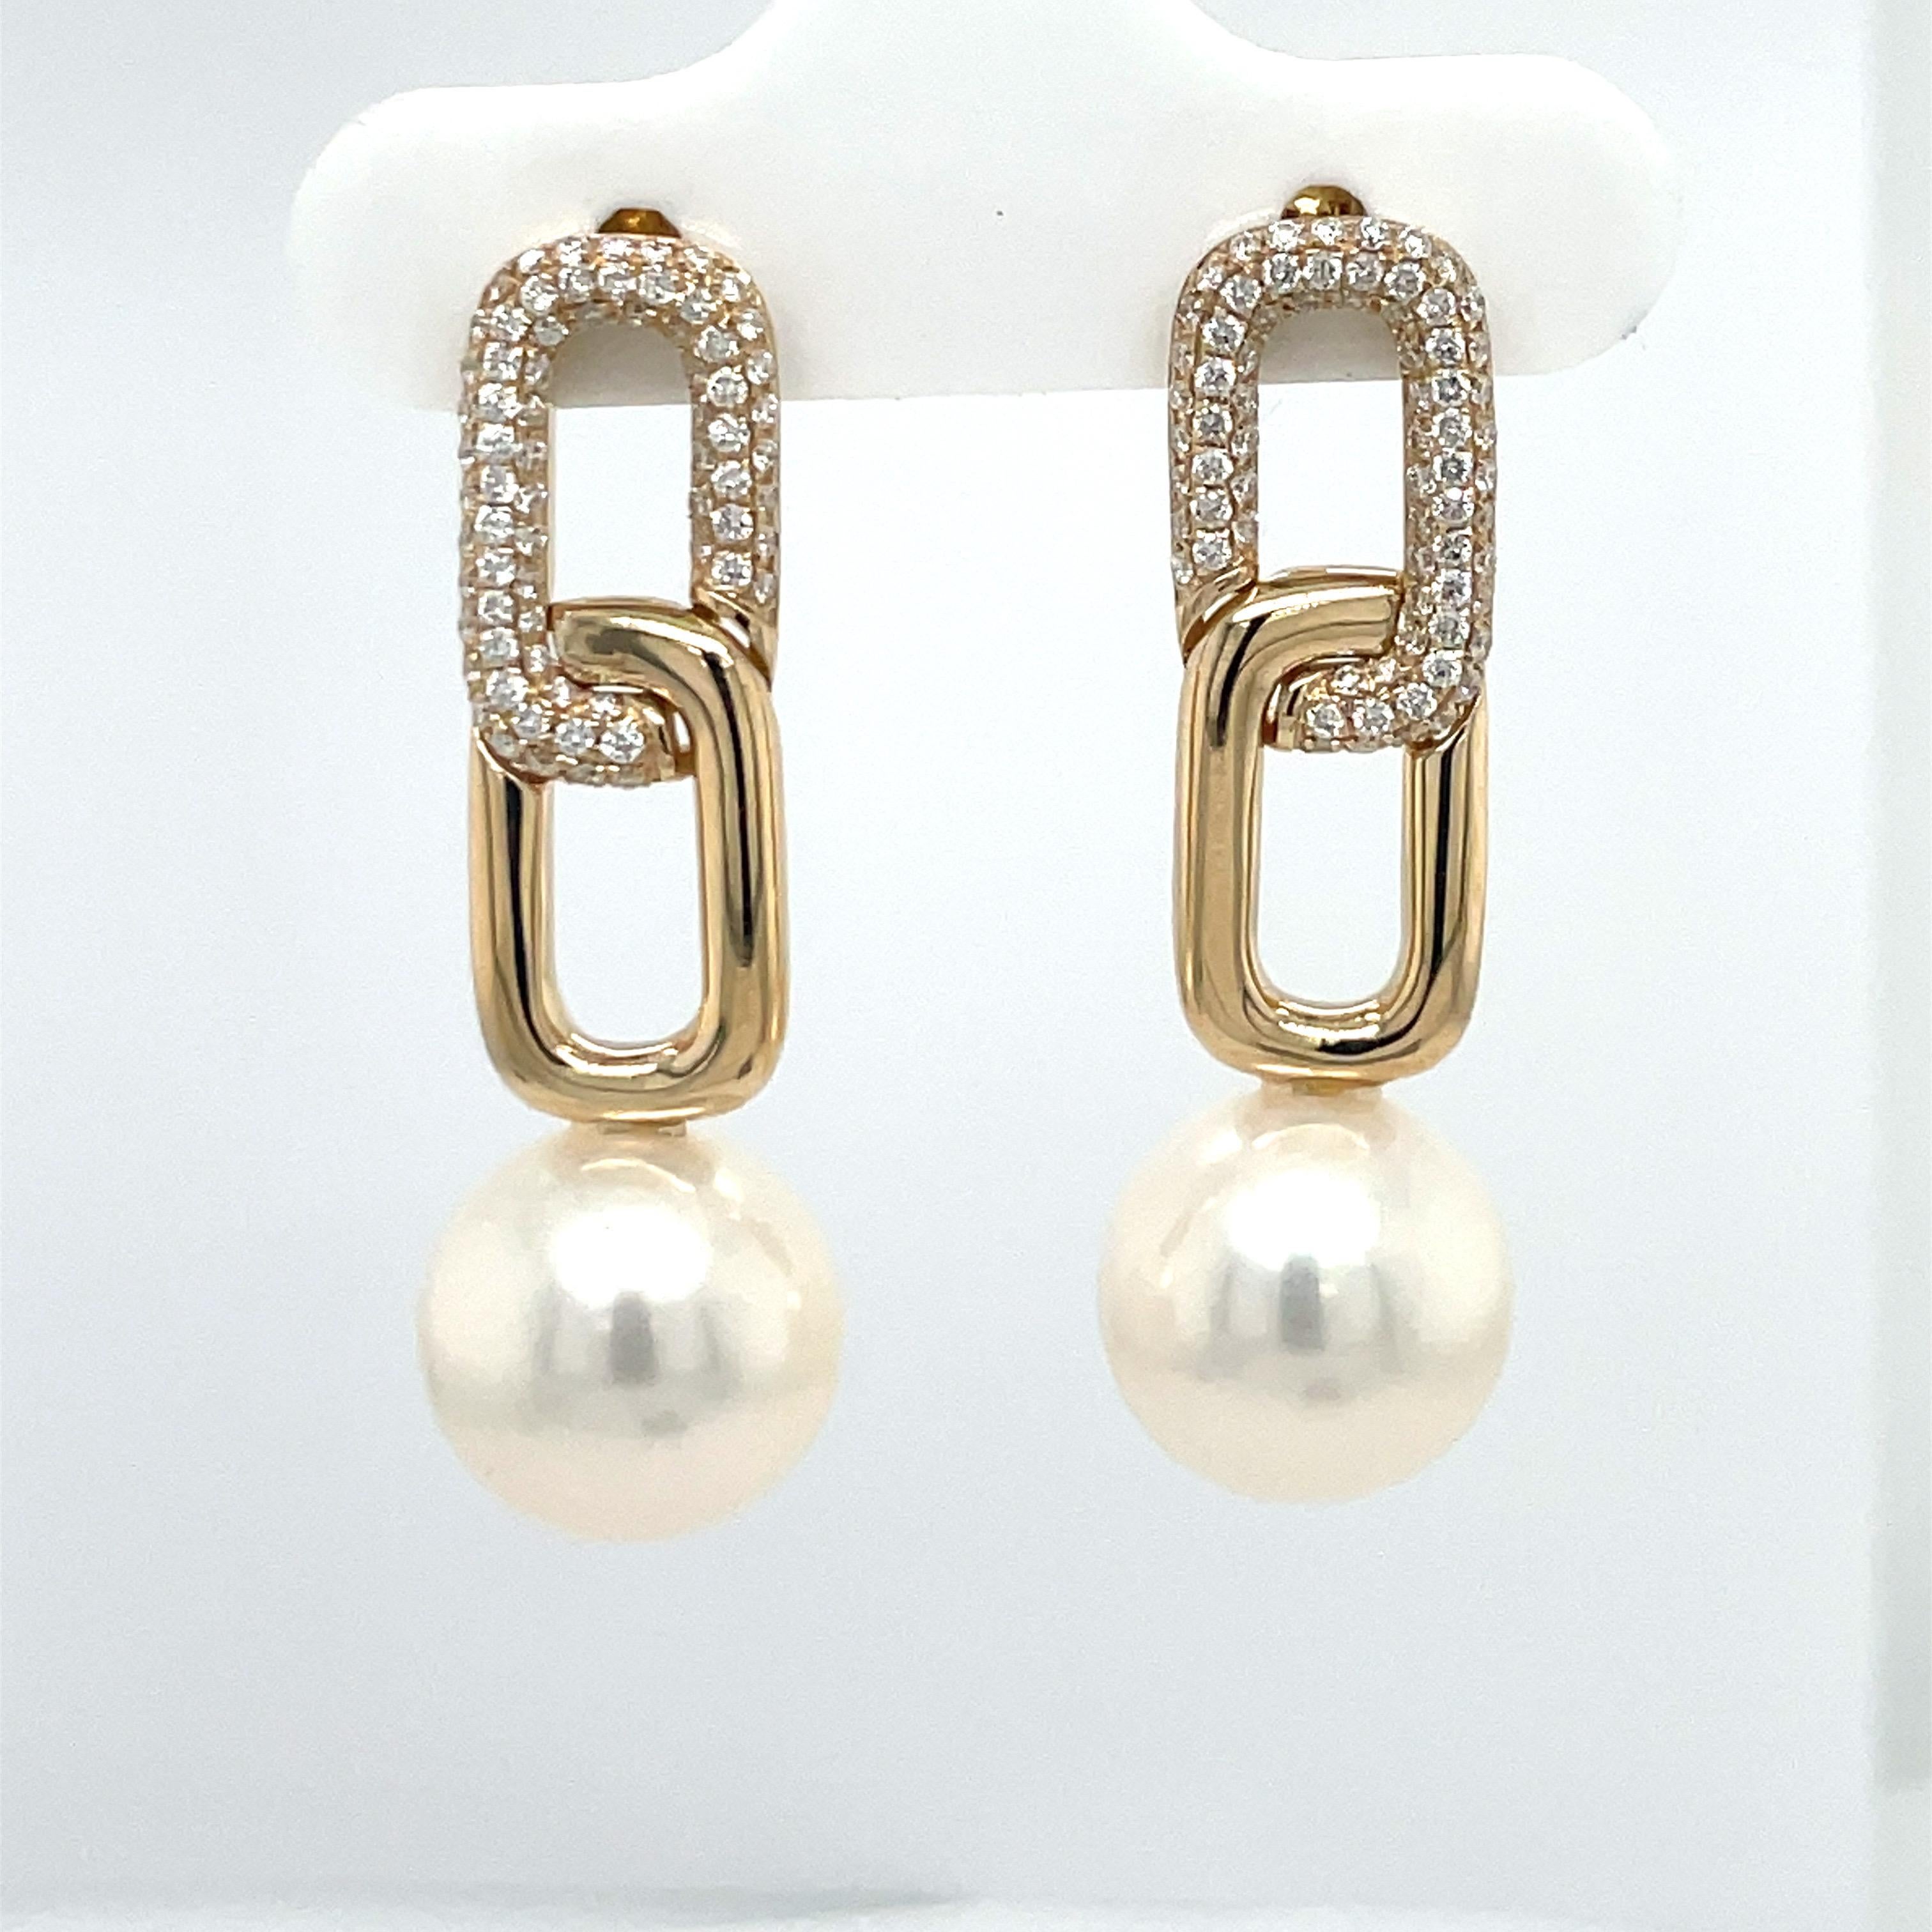 14 Karat Yellow gold Cuban link drop earrings featuring 142 round brilliants weighing 0.46 Carats and two Freshwater Pearls measuring 11-122 MM. 
Can customize pearl color. 